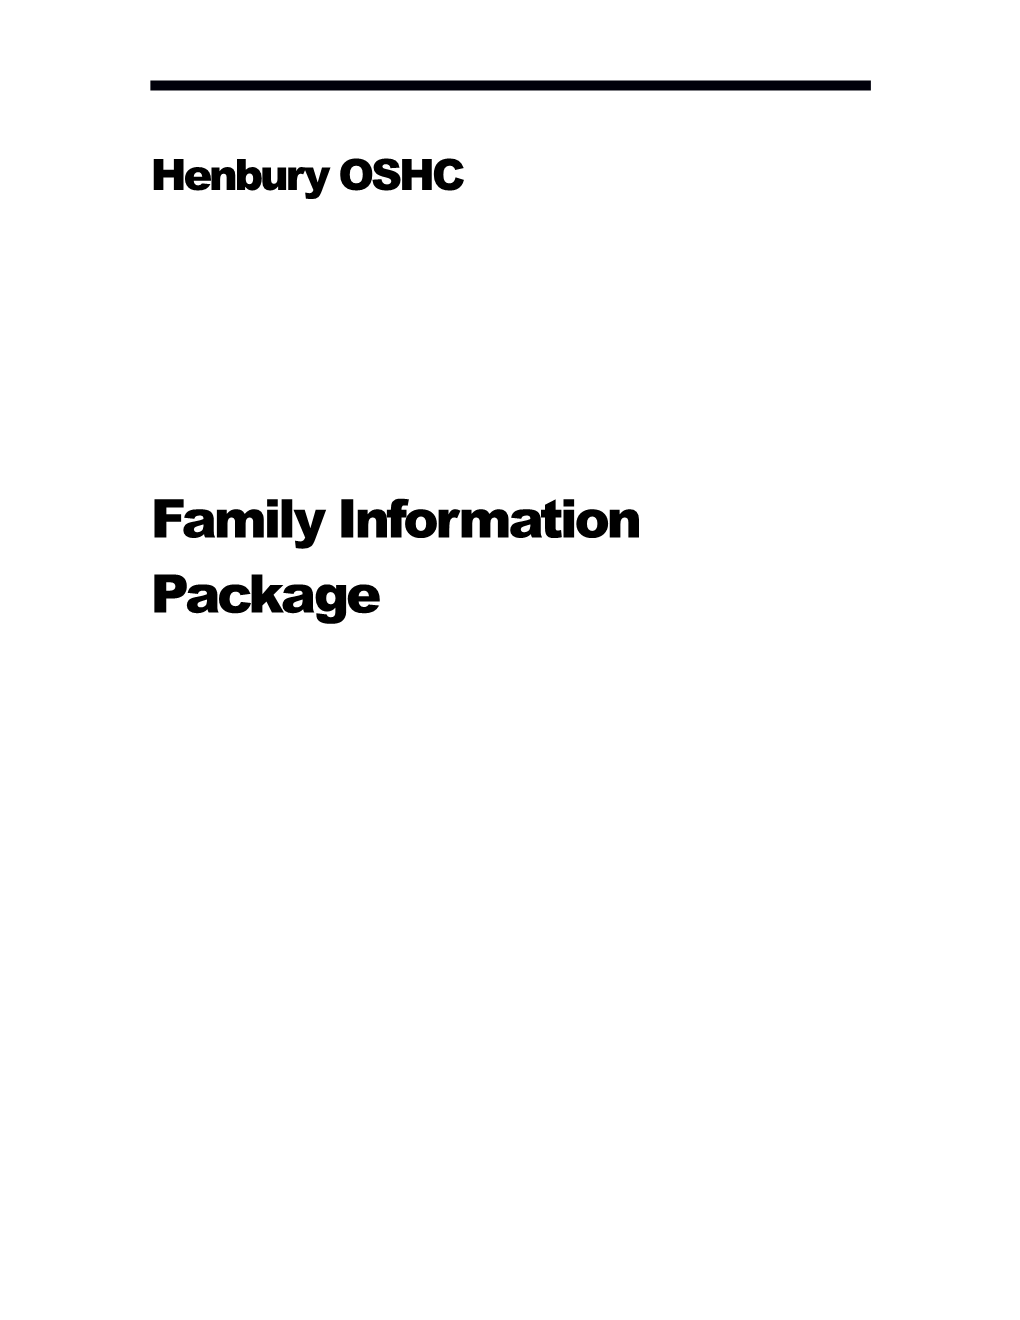 Family Information Package